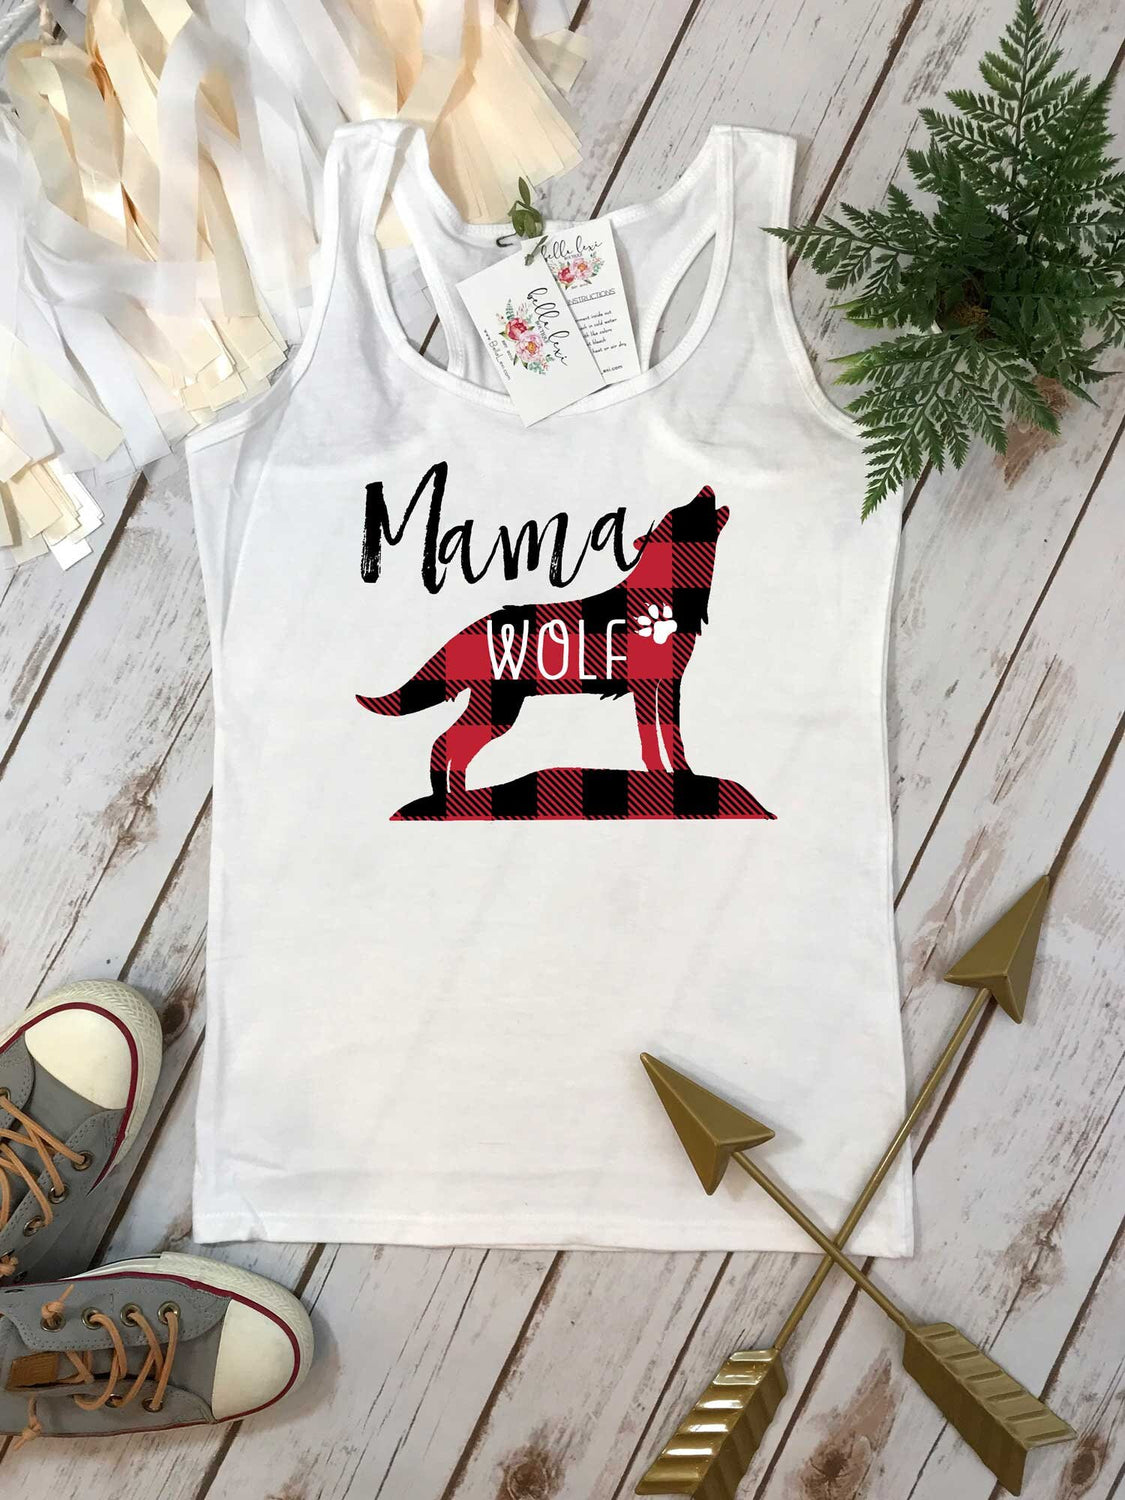 Mama Wolf Shirt, Mommy and Me shirts, Mommy and Me Outfits, Buffalo Plaid Shirt, Mom Shirts, Family Outfits, Baby Shower Gift for Mom, RED